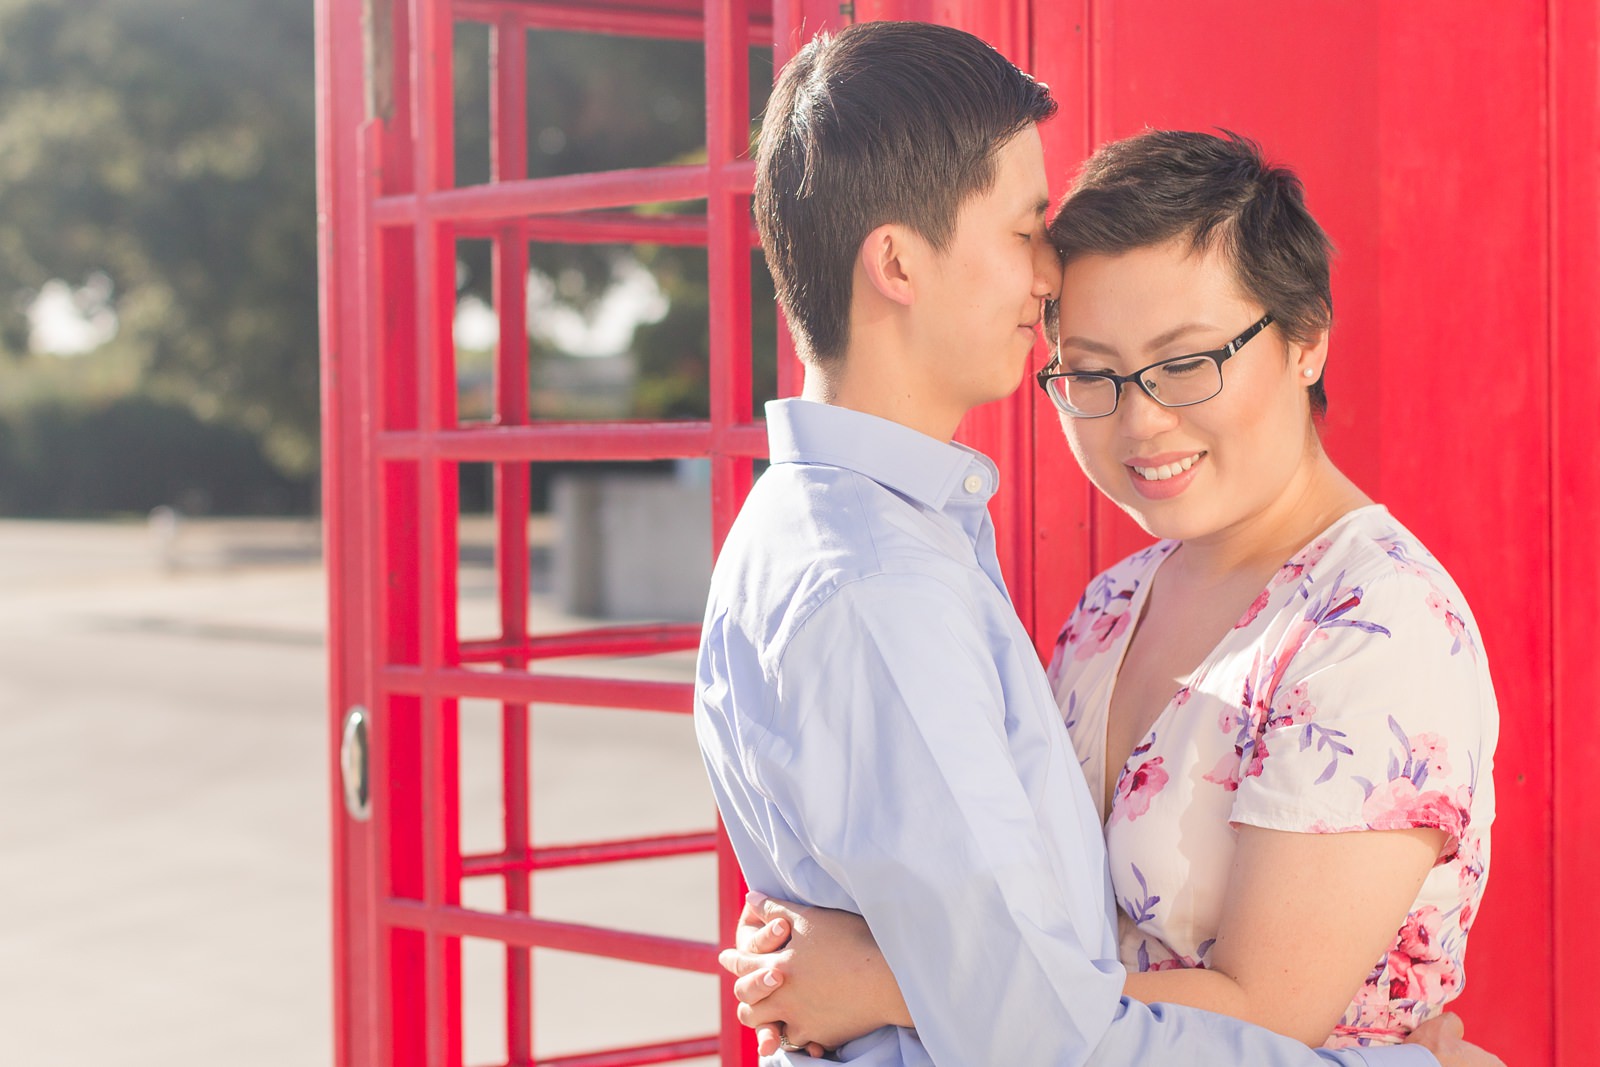 Engaged Couple Pose in Front of Red Telephone Booth by Adrienne and Dani Photography